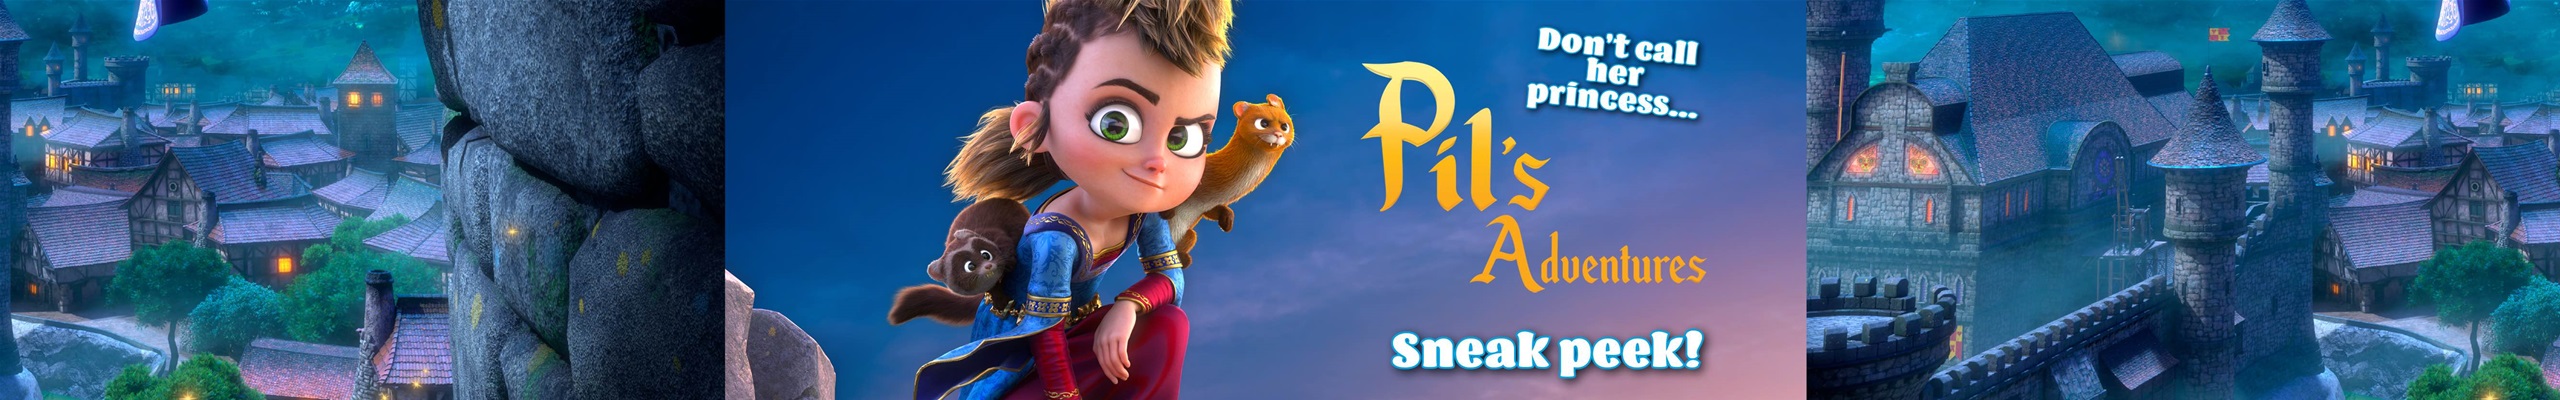 Let's go! Sneak a peek of the cool new movie Pil's Adventures!